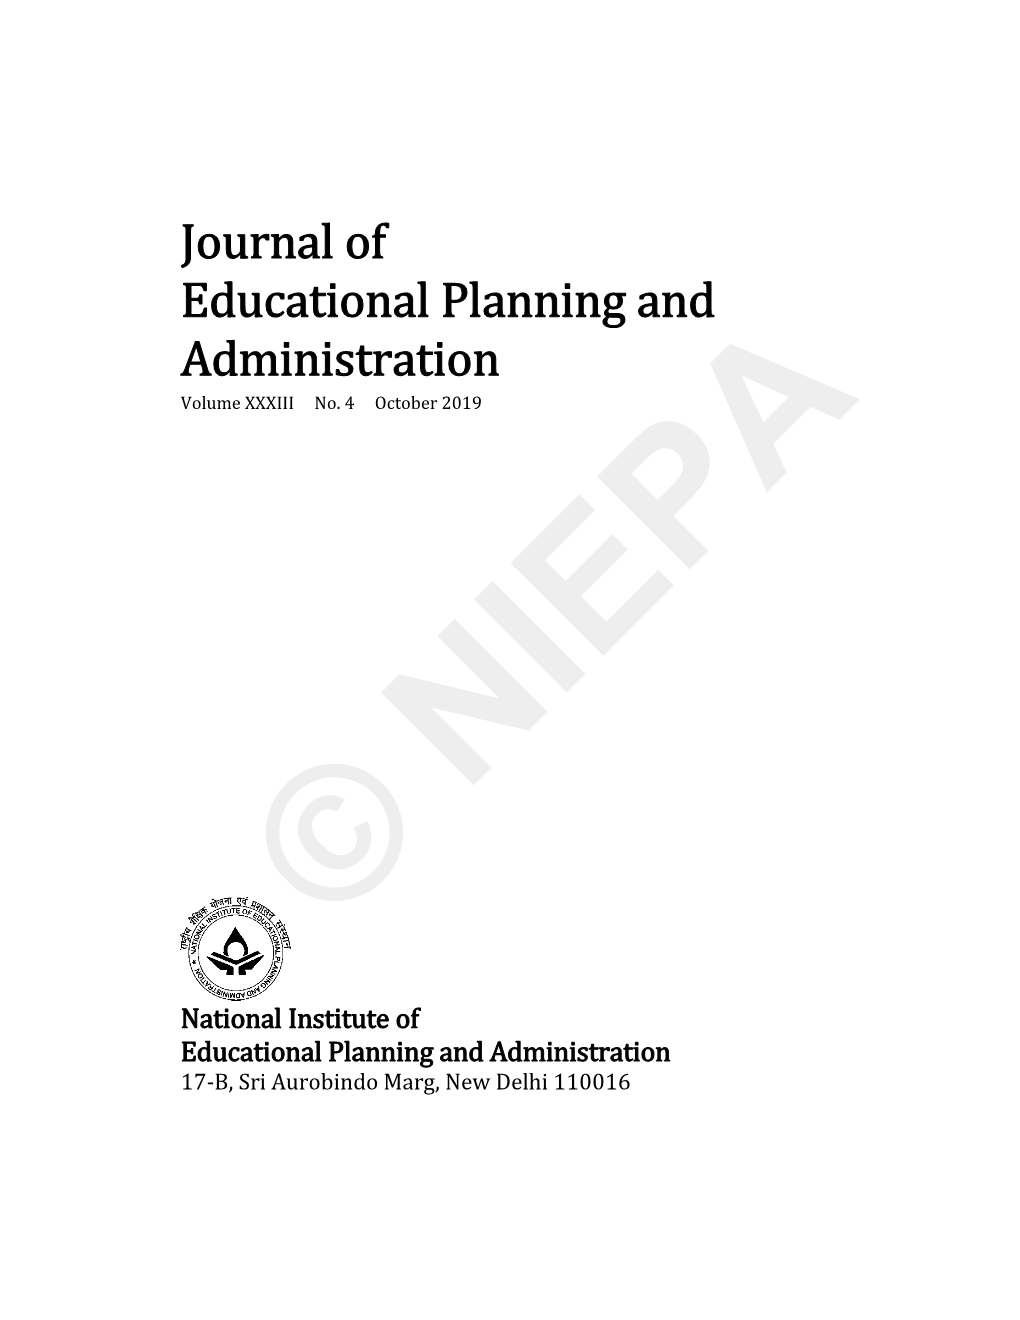 Journal of Educational Planning and Administration Volume XXXIII No